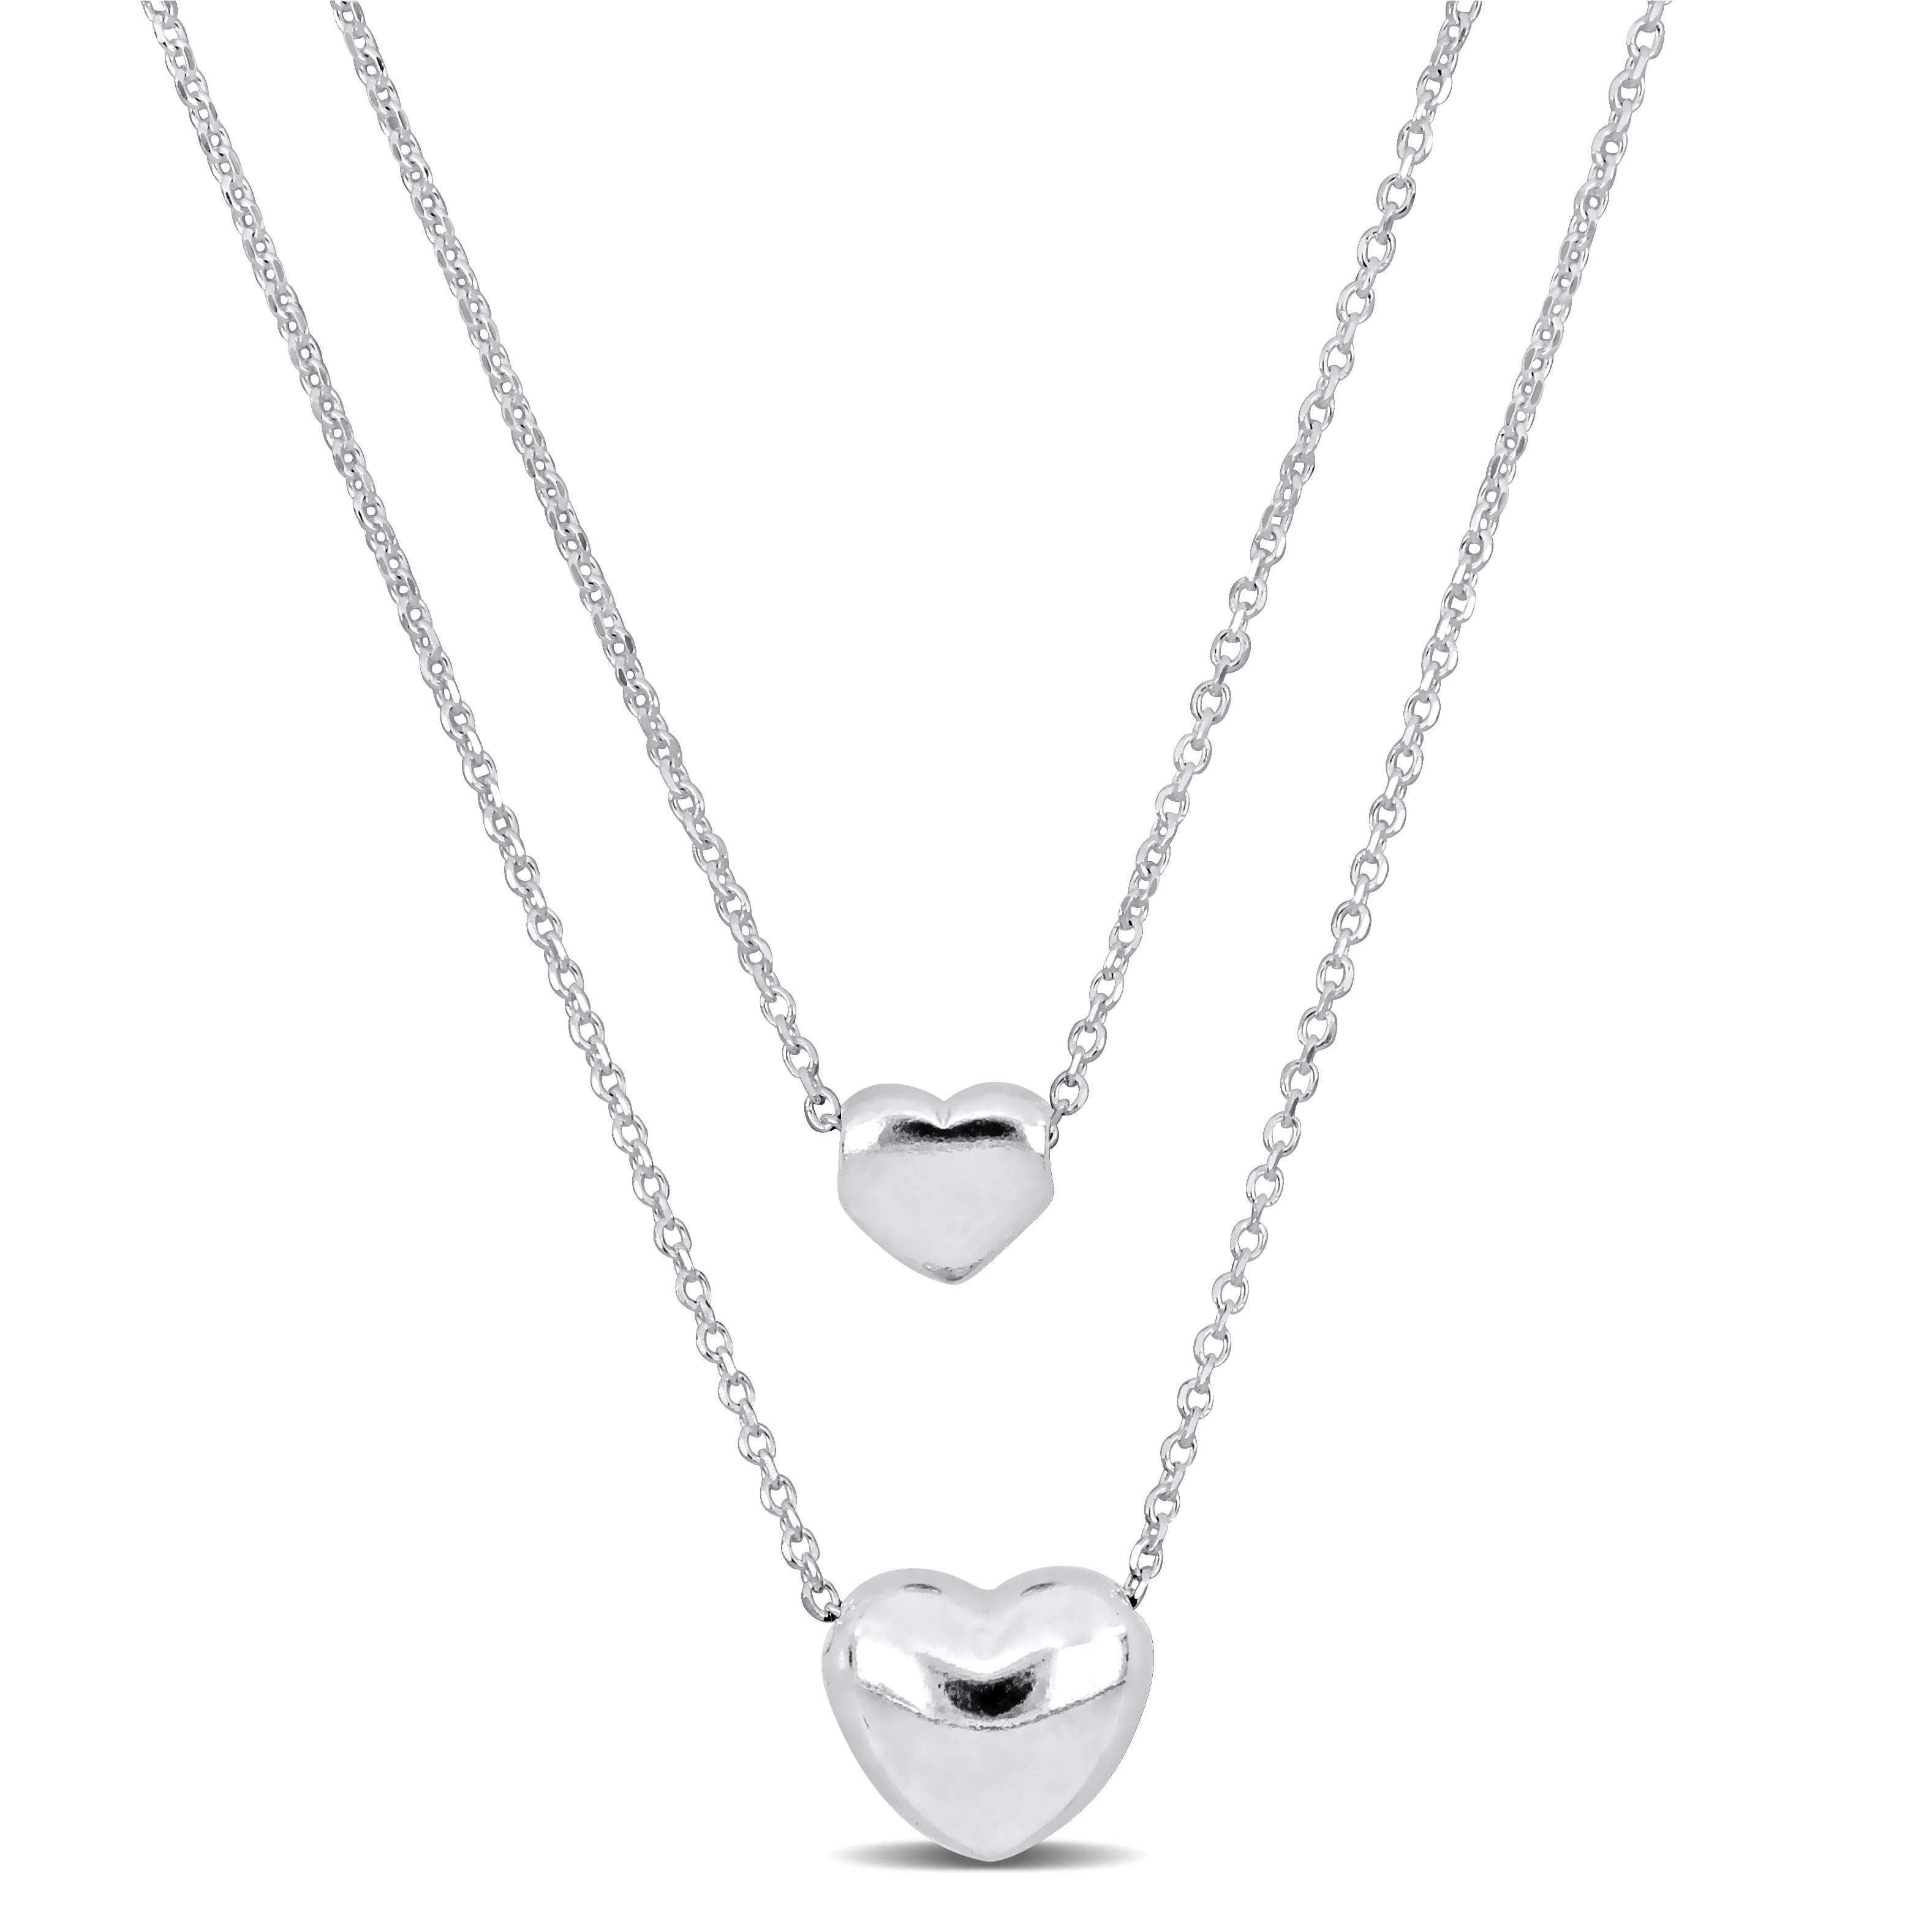 Two Heart Double Strand Charm Necklace in Sterling Silver - 16+18 in.